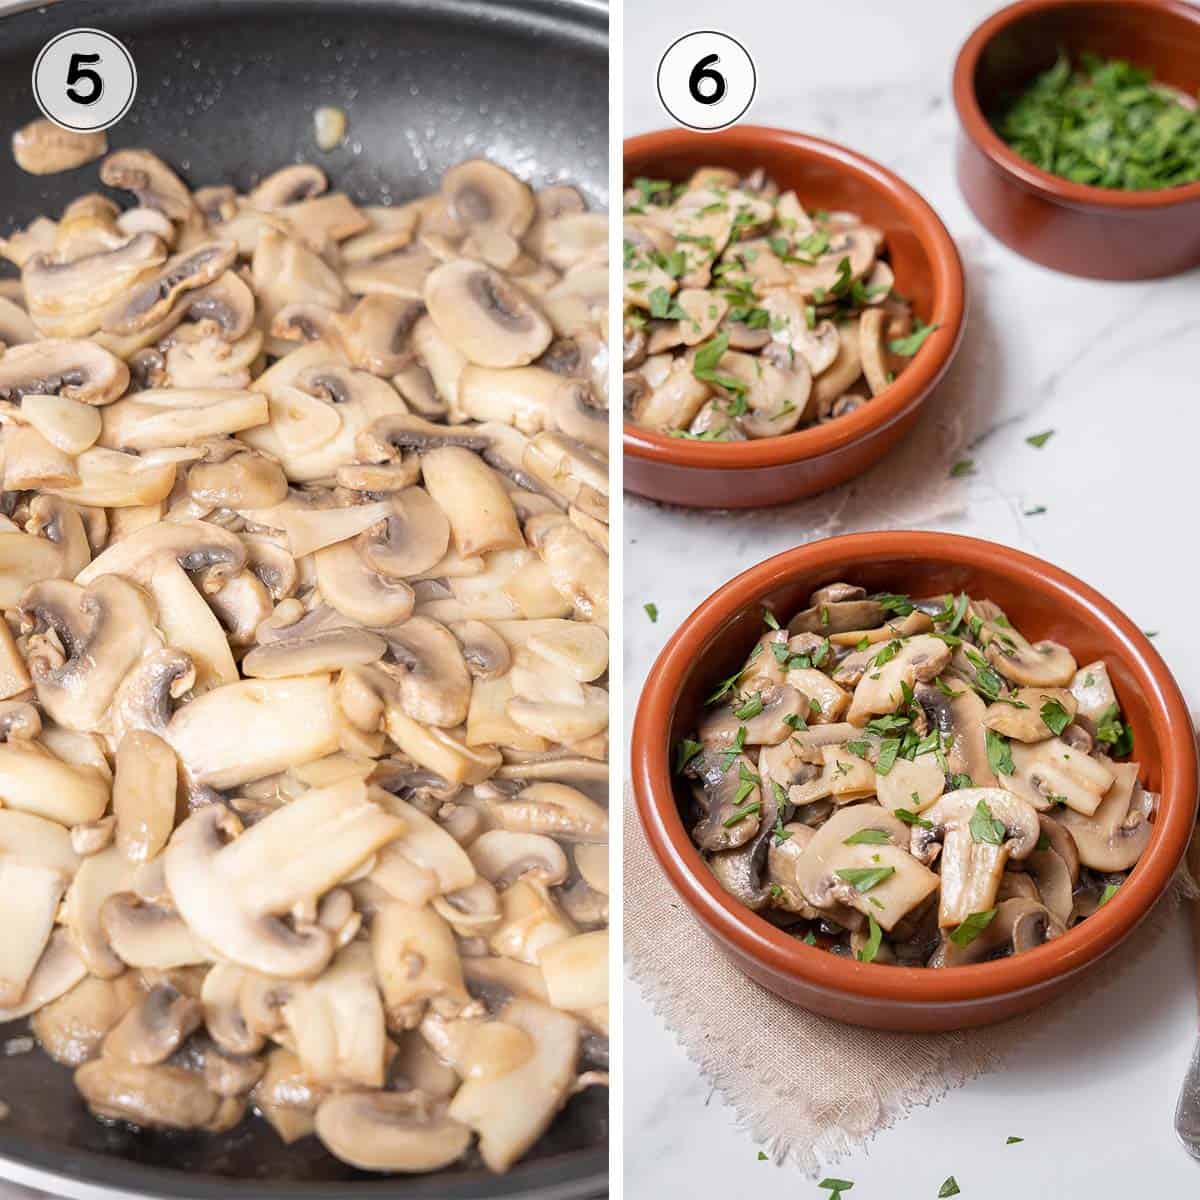 frying and serving the garlic mushrooms.